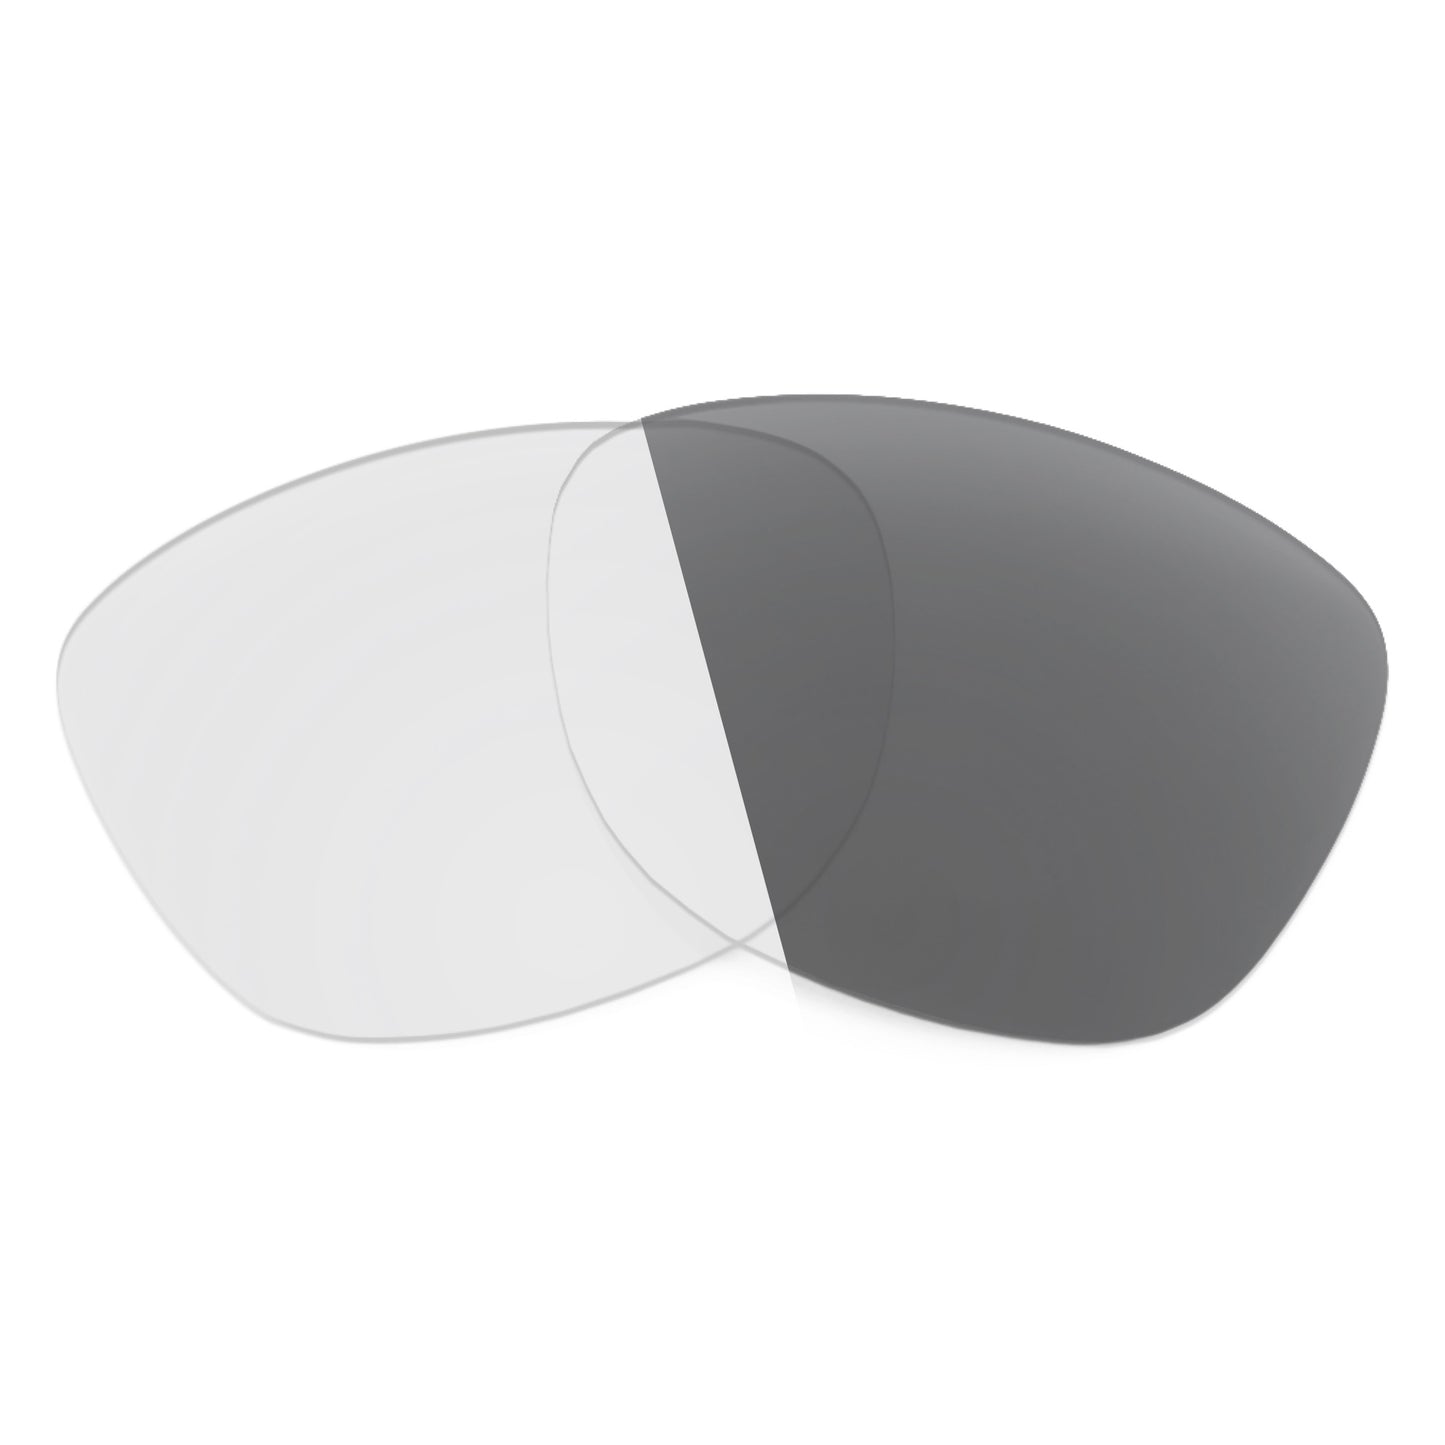 Revant replacement lenses for Ray-Ban Justin RB4165 51mm Non-Polarized Adapt Gray Photochromic